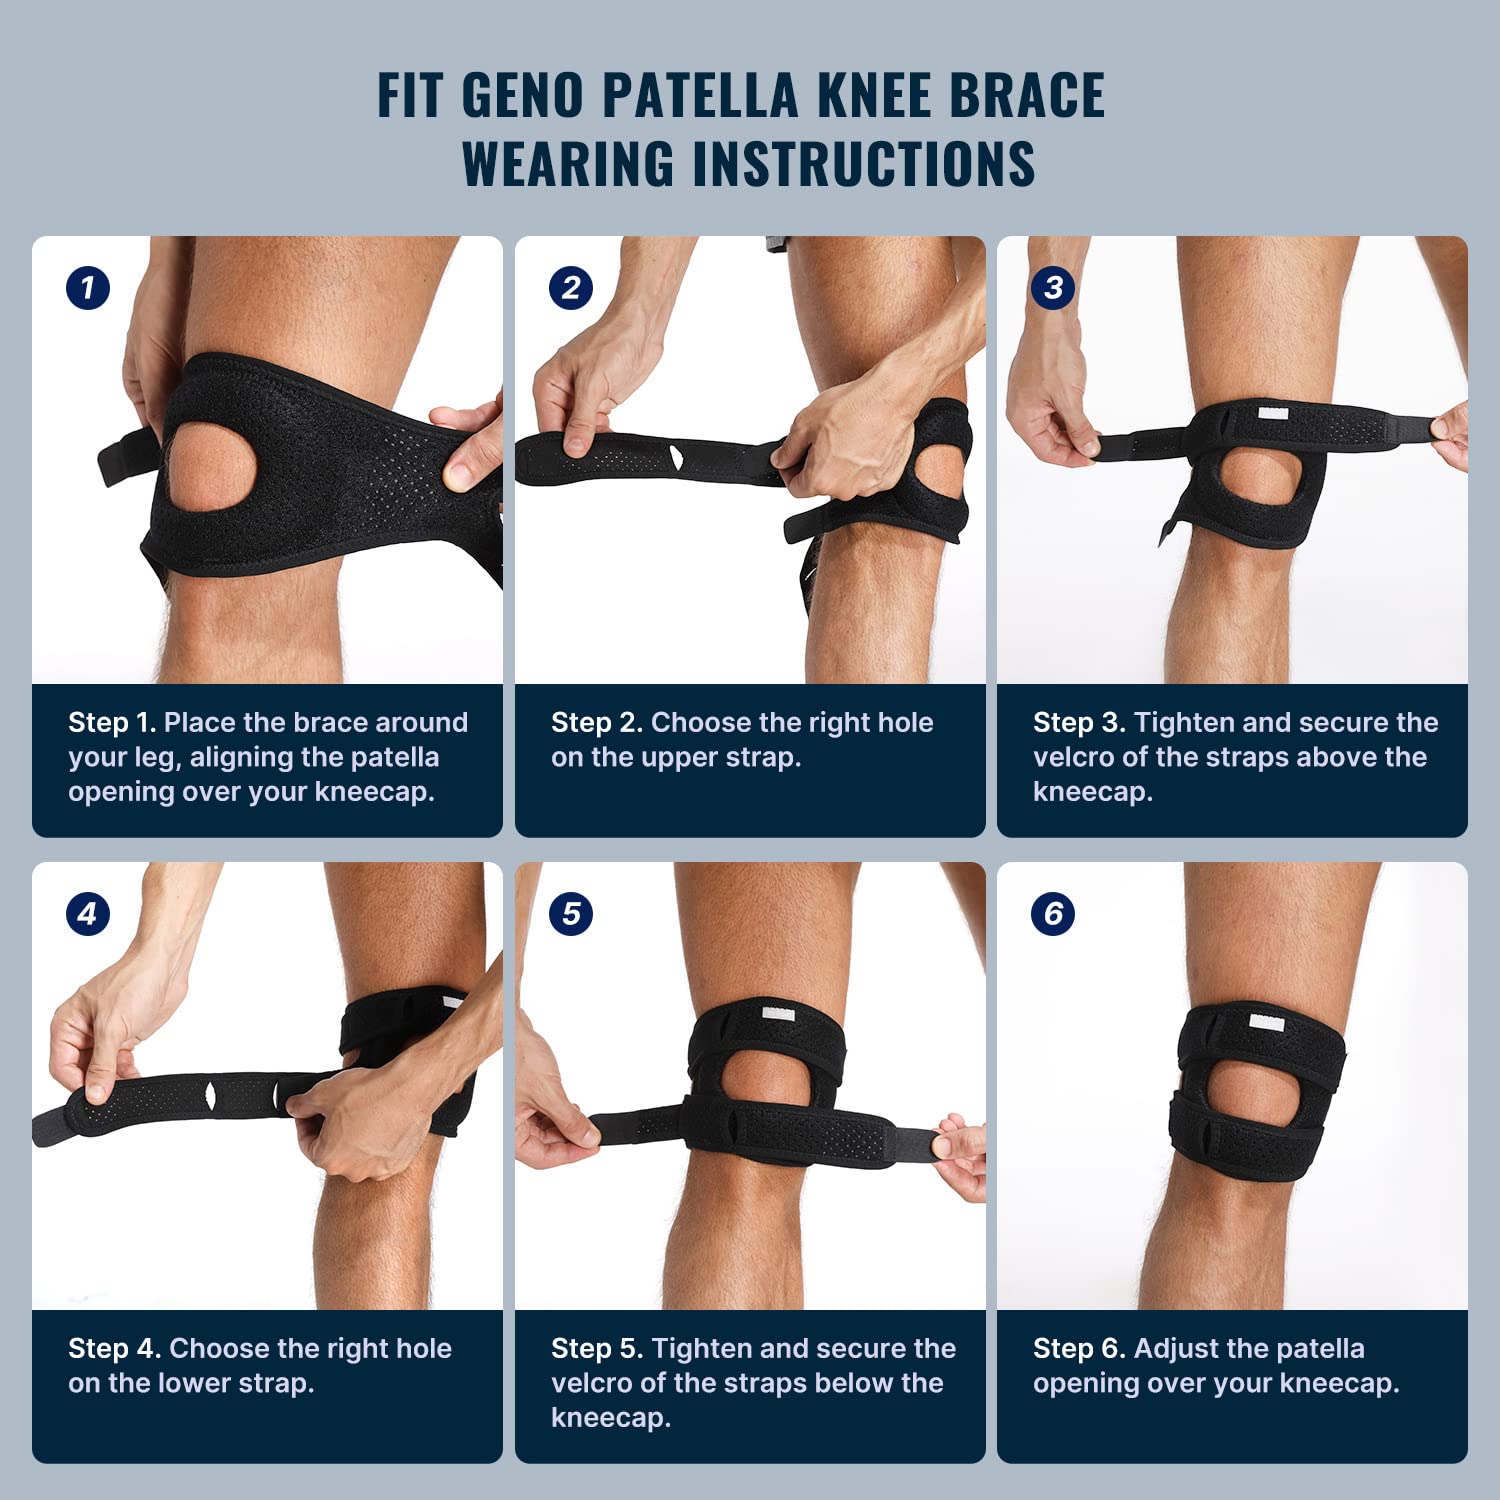 What You Must Know Before Choosing A Knee Brace